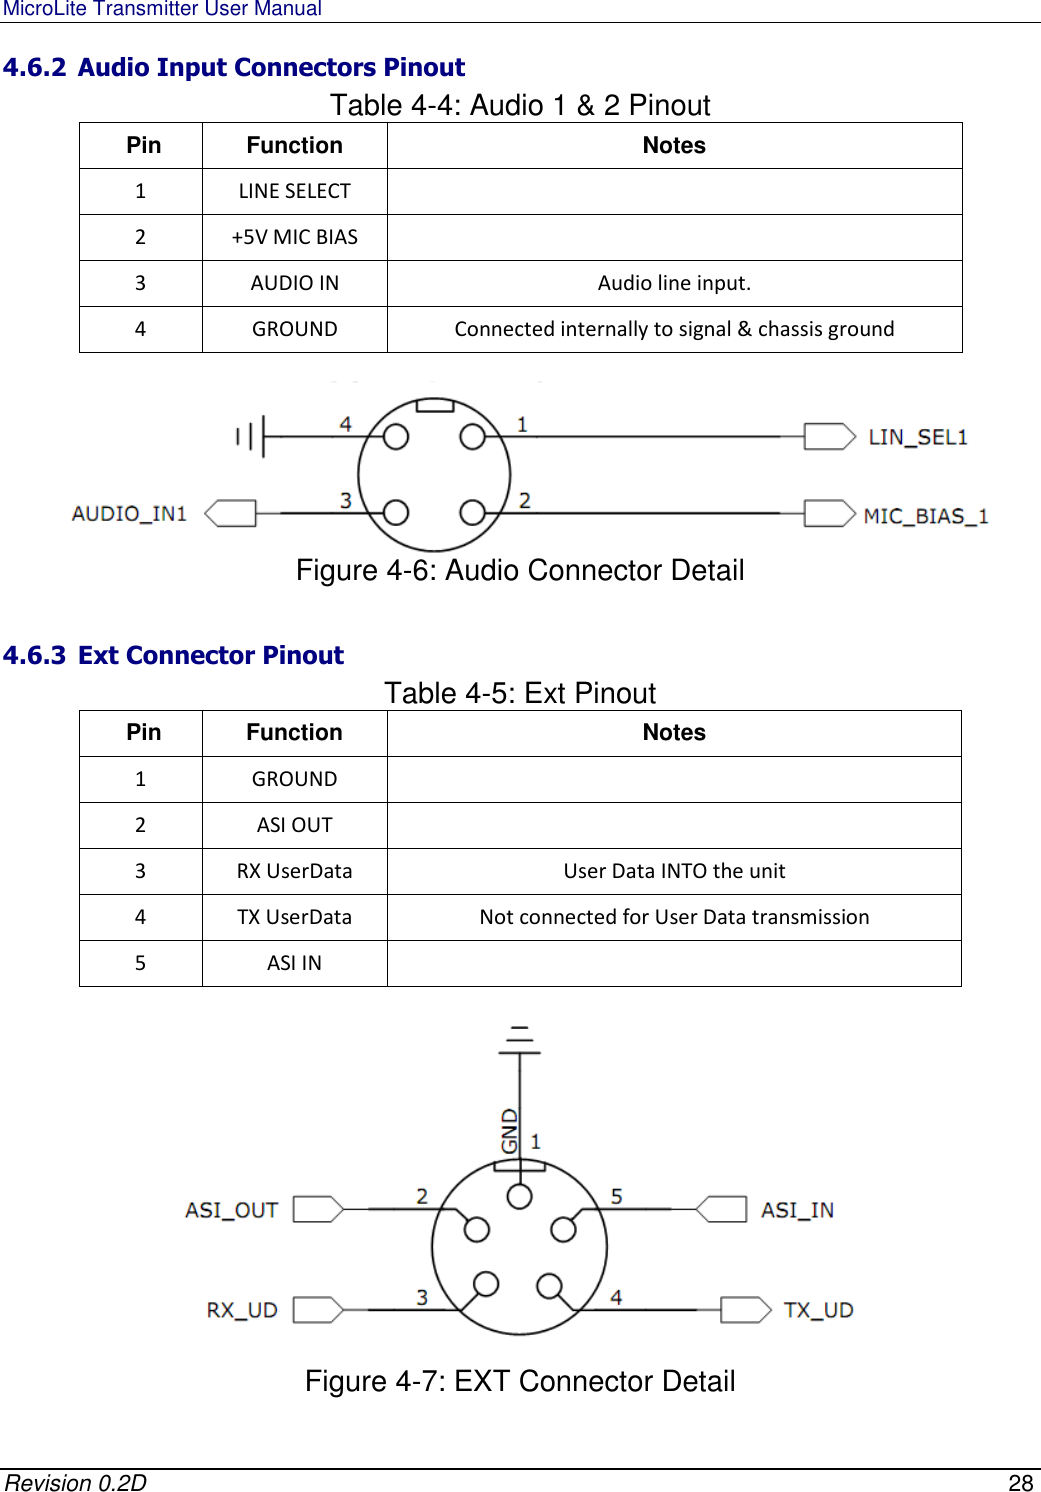 MicroLite Transmitter User Manual   Revision 0.2D    28 4.6.2 Audio Input Connectors Pinout Table 4-4: Audio 1 &amp; 2 Pinout  Pin  Function  Notes 1  LINE SELECT   2  +5V MIC BIAS   3  AUDIO IN  Audio line input. 4  GROUND  Connected internally to signal &amp; chassis ground   Figure 4-6: Audio Connector Detail  4.6.3 Ext Connector Pinout Table 4-5: Ext Pinout  Pin  Function  Notes 1  GROUND   2  ASI OUT   3  RX UserData  User Data INTO the unit 4  TX UserData  Not connected for User Data transmission 5  ASI IN      Figure 4-7: EXT Connector Detail 